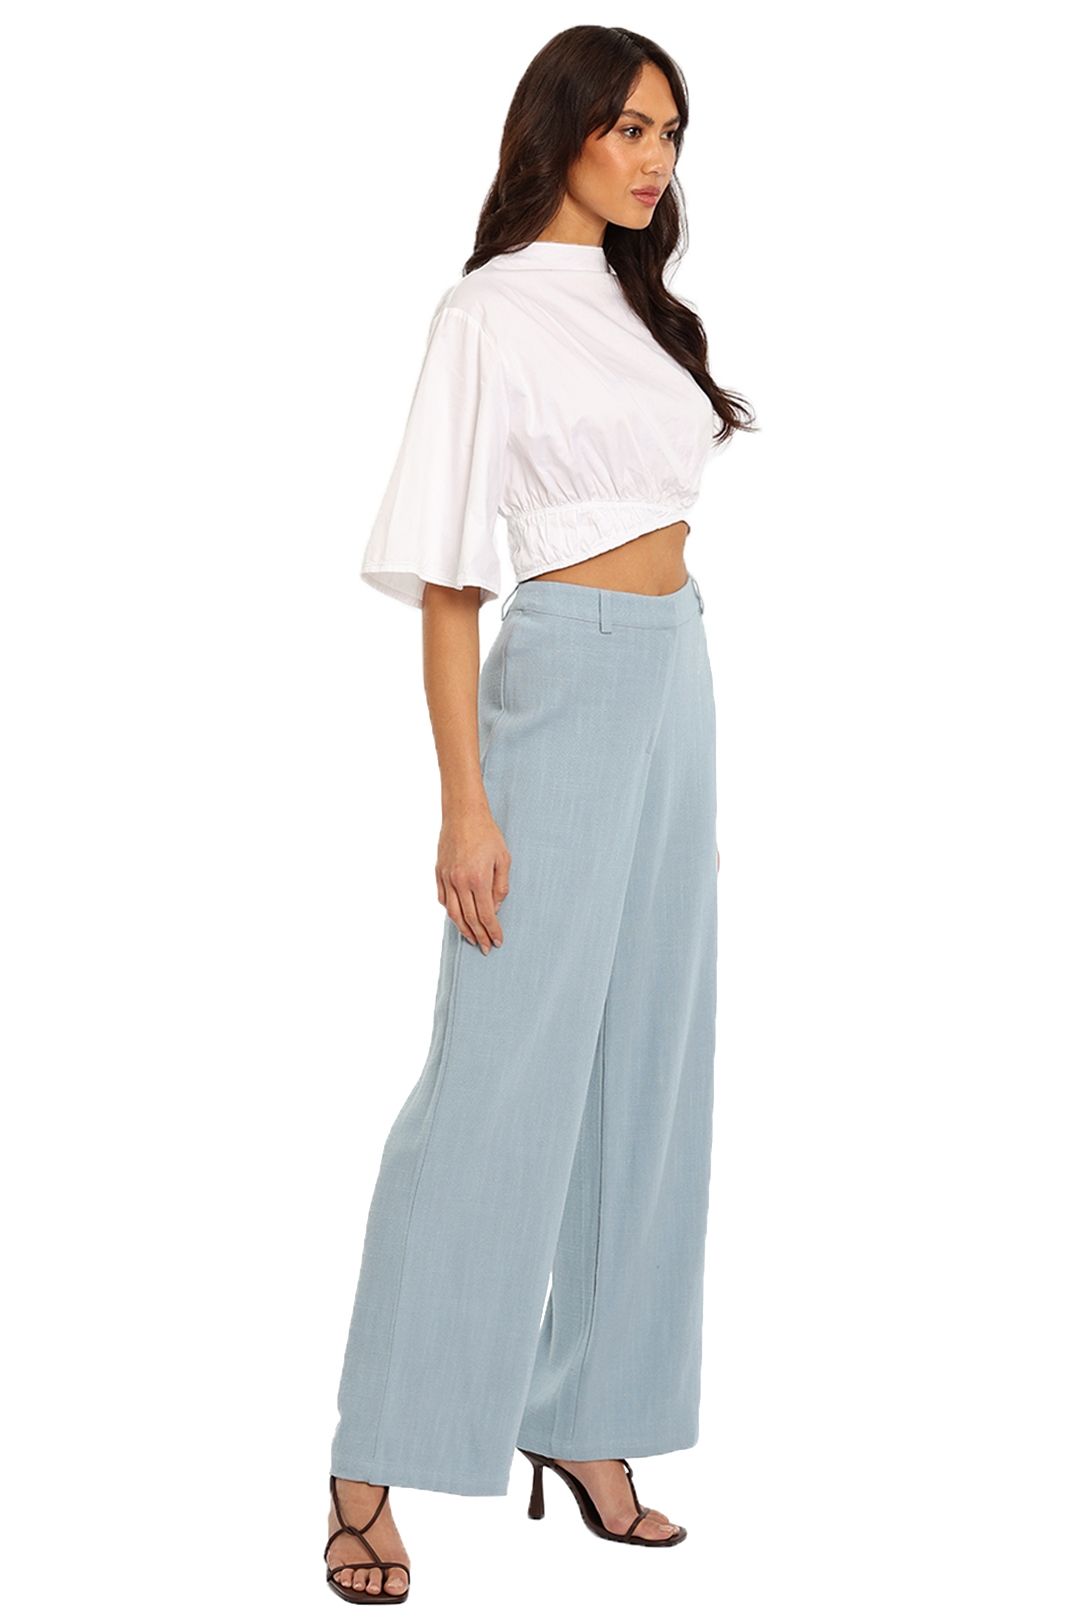 Staple The Label Florence Wide Leg Pants